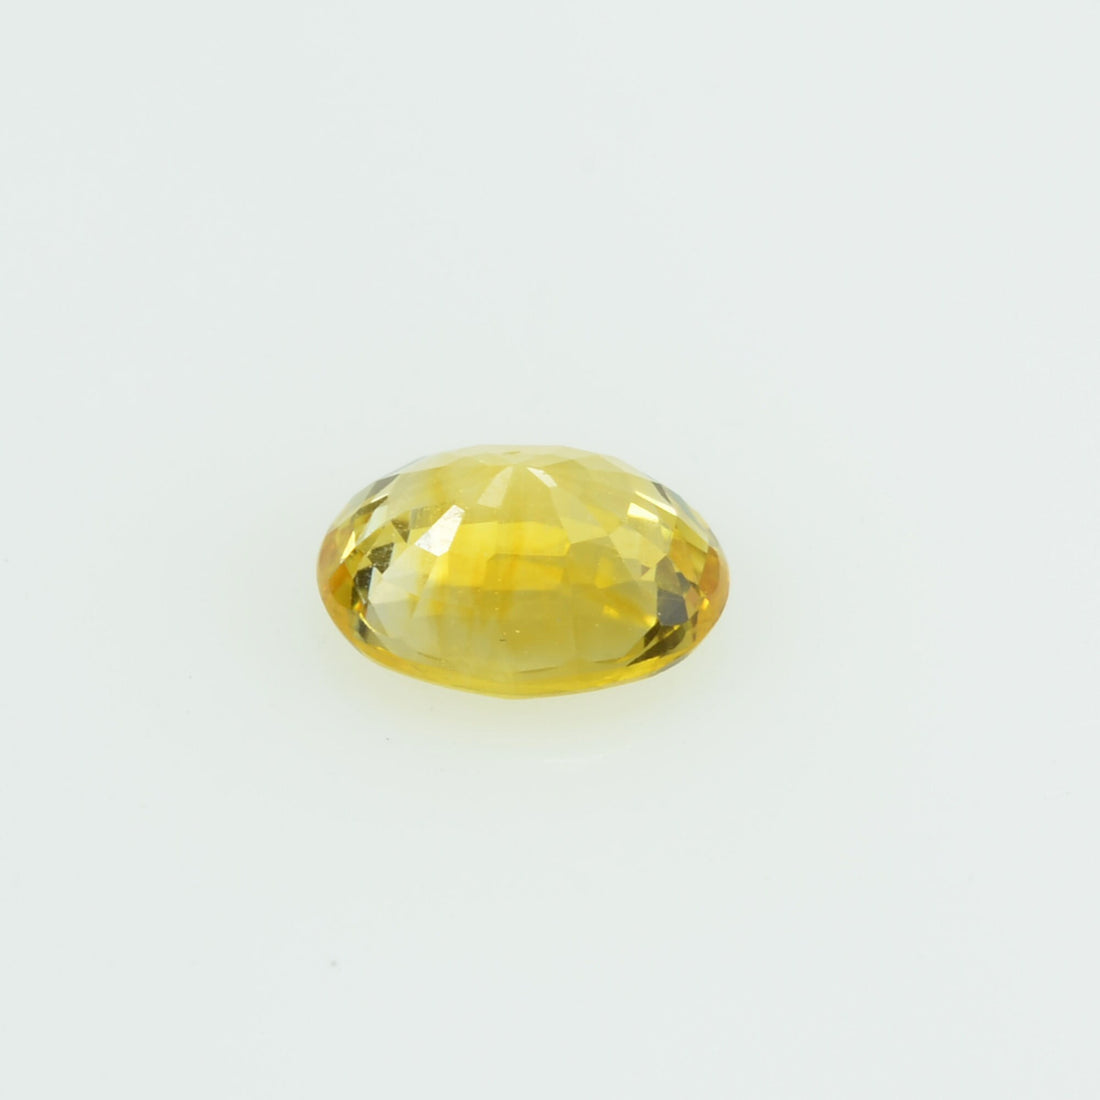 0.42 Cts Natural Yellow Sapphire Loose Gemstone Oval Cut